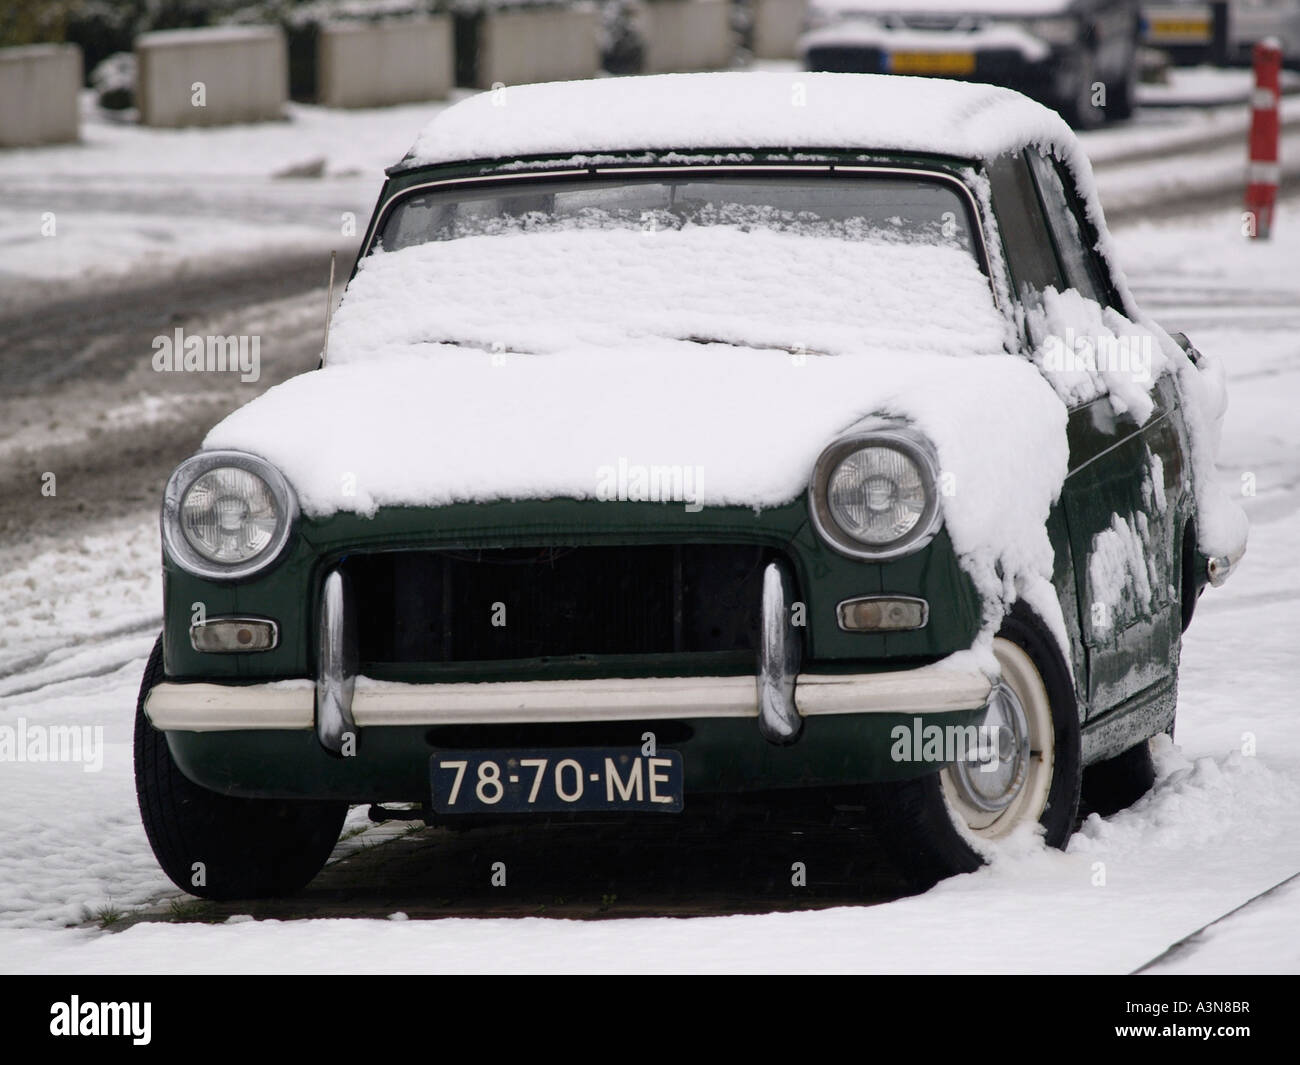 Classic car British racing green Triumph Herald covered in snow Dutch license plate Breda the Netherlands Stock Photo